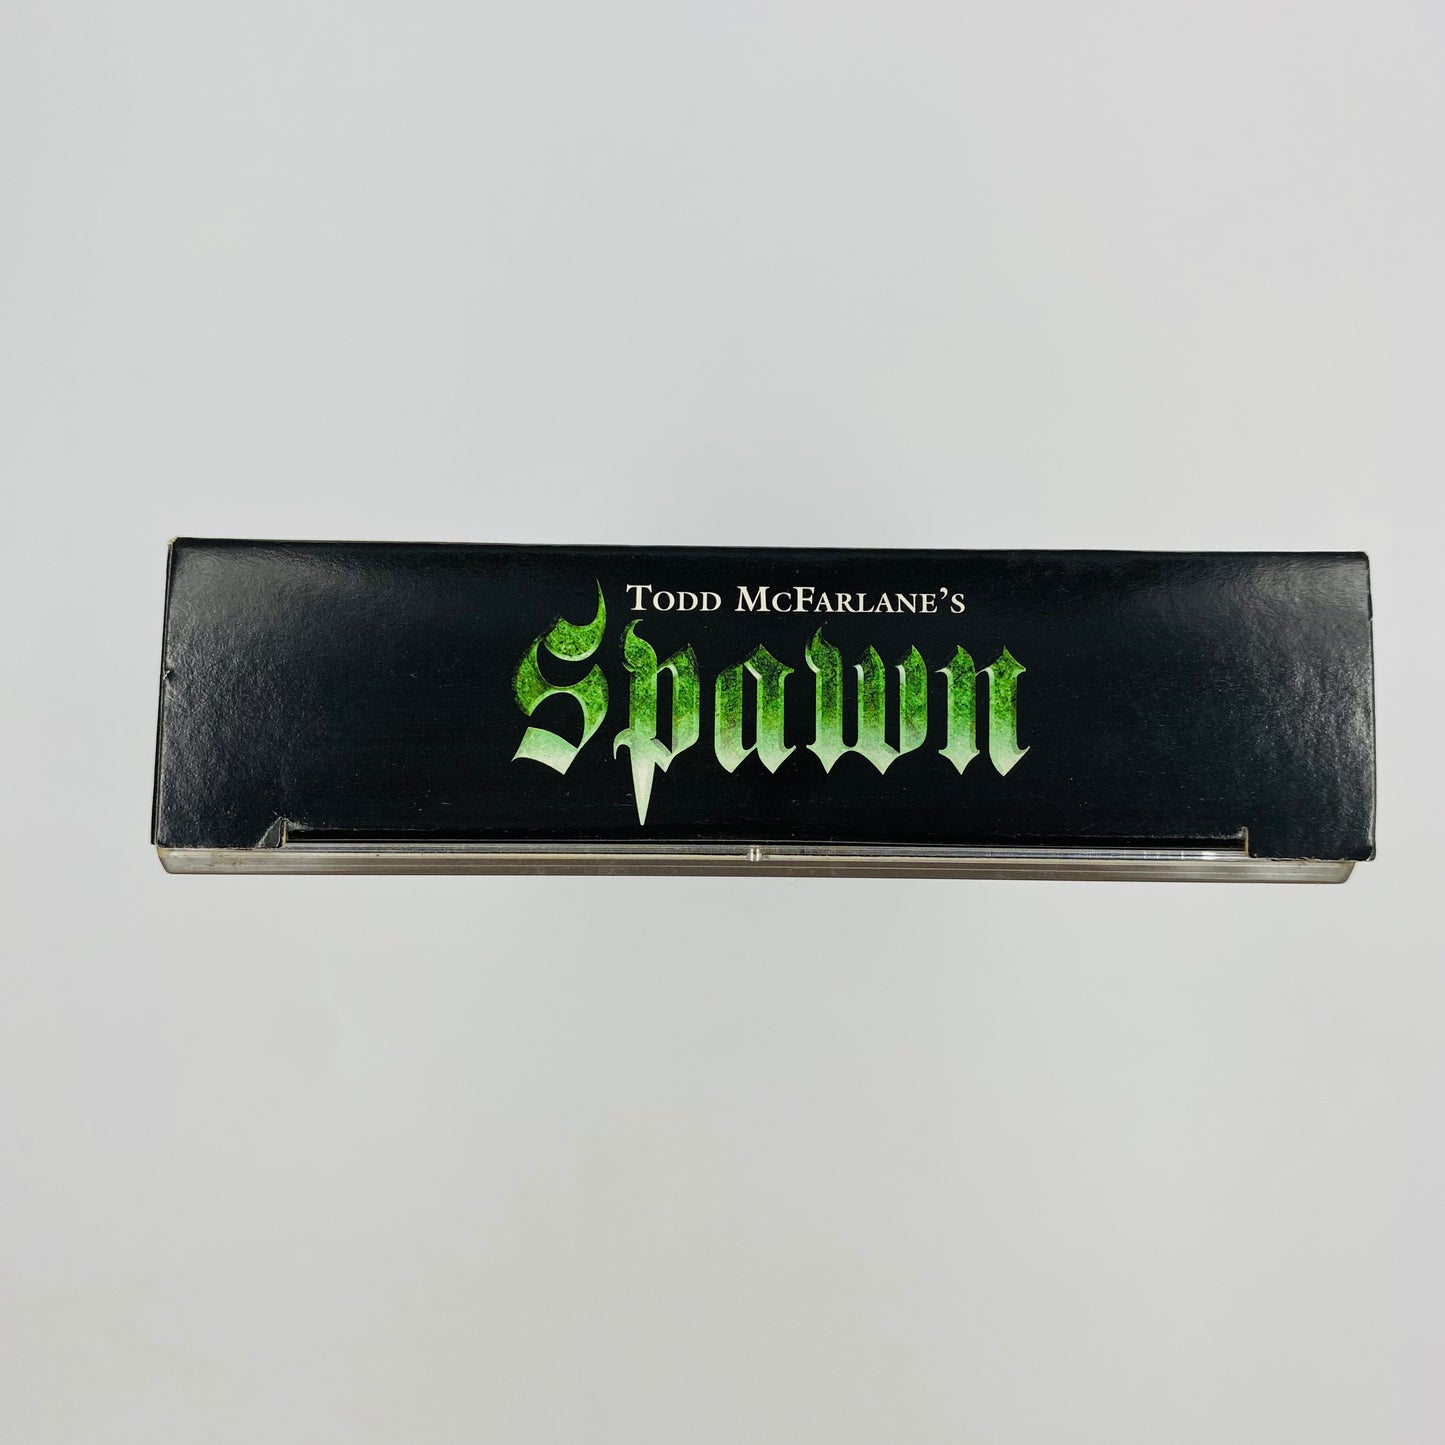 Spawn Animated volumes 1-3 VHS tapes (1997-1999) HBO Home Video